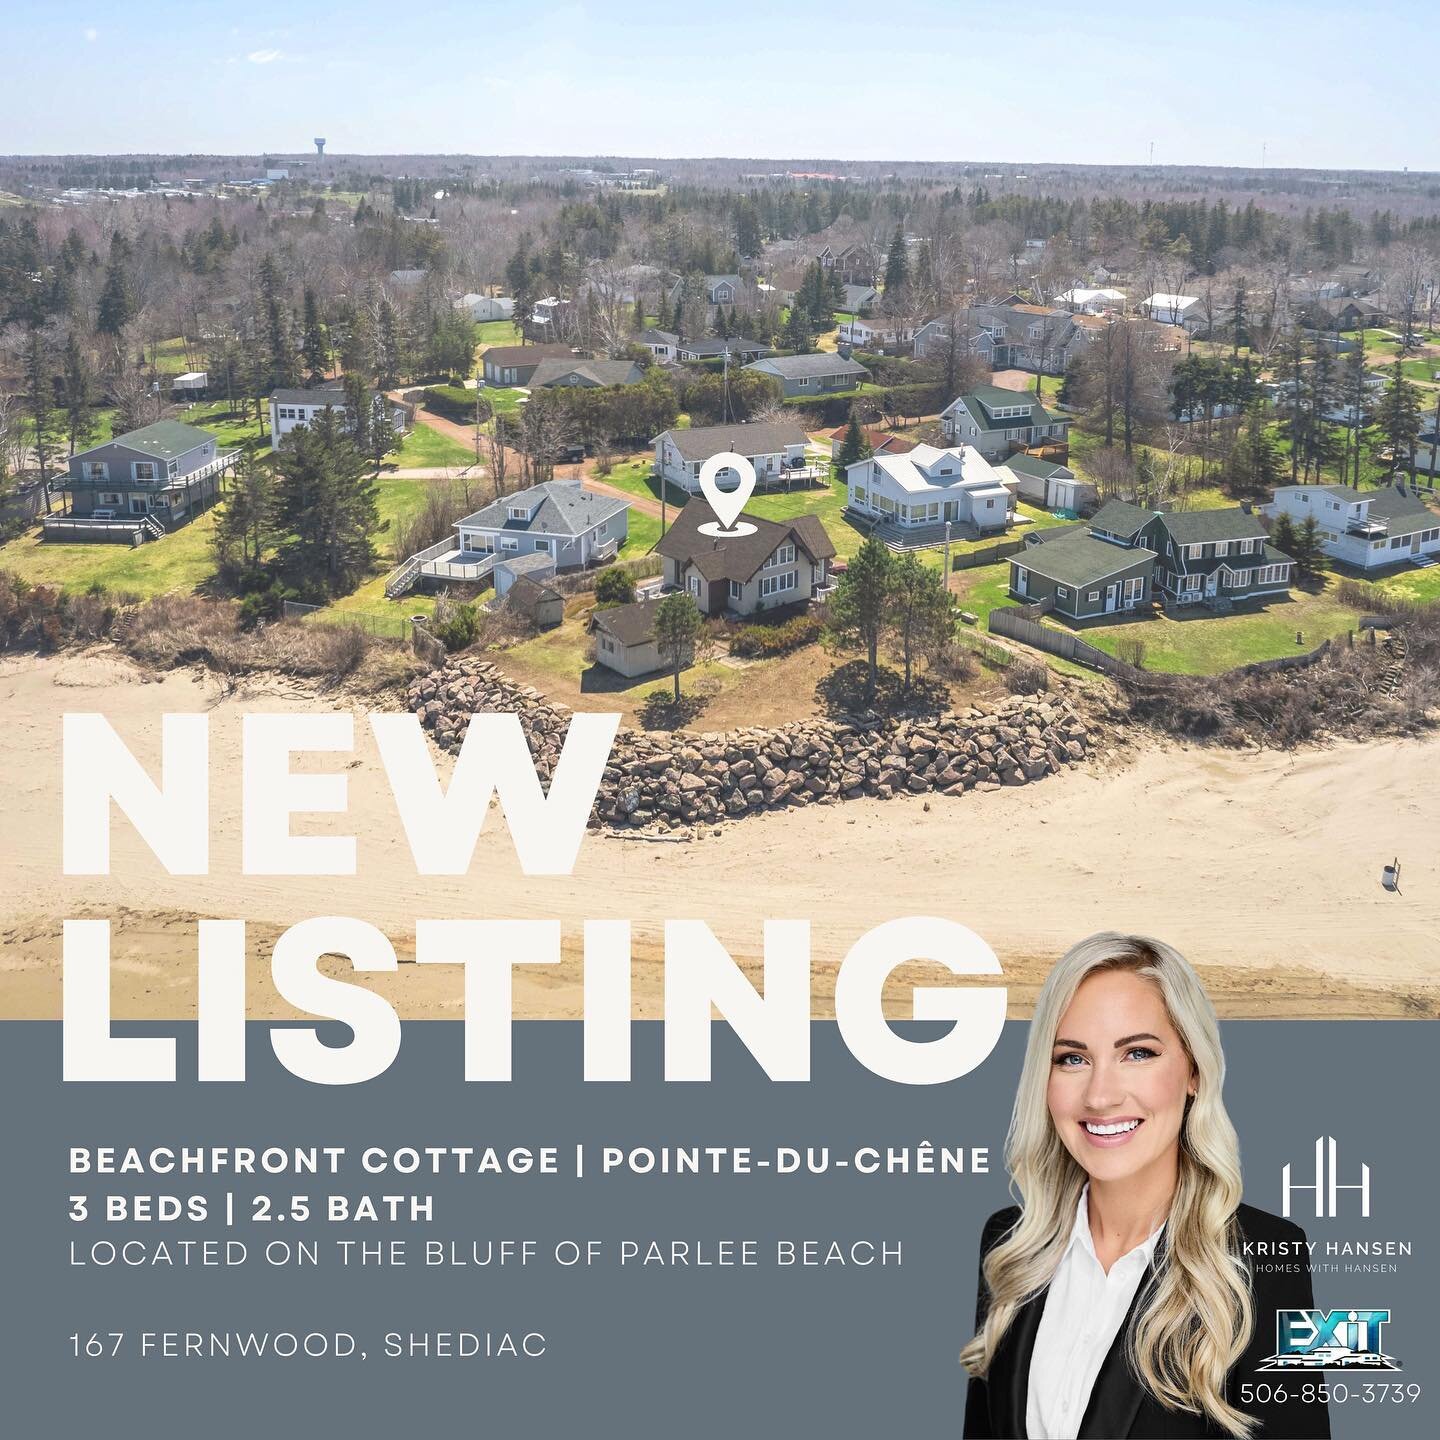 🌊 BEACHFRONT PROPERTY 🌊 
▫️167 Fernwood, Shediac 
▫️Offered at $749,900

🏖️ Welcome to your dream BEACHFRONT cottage located on the BLUFF of PARLEE BEACH  in Pointe-Du-Chene! This stunning waterfront property boasts 3 bedrooms, 2 full baths and 1 